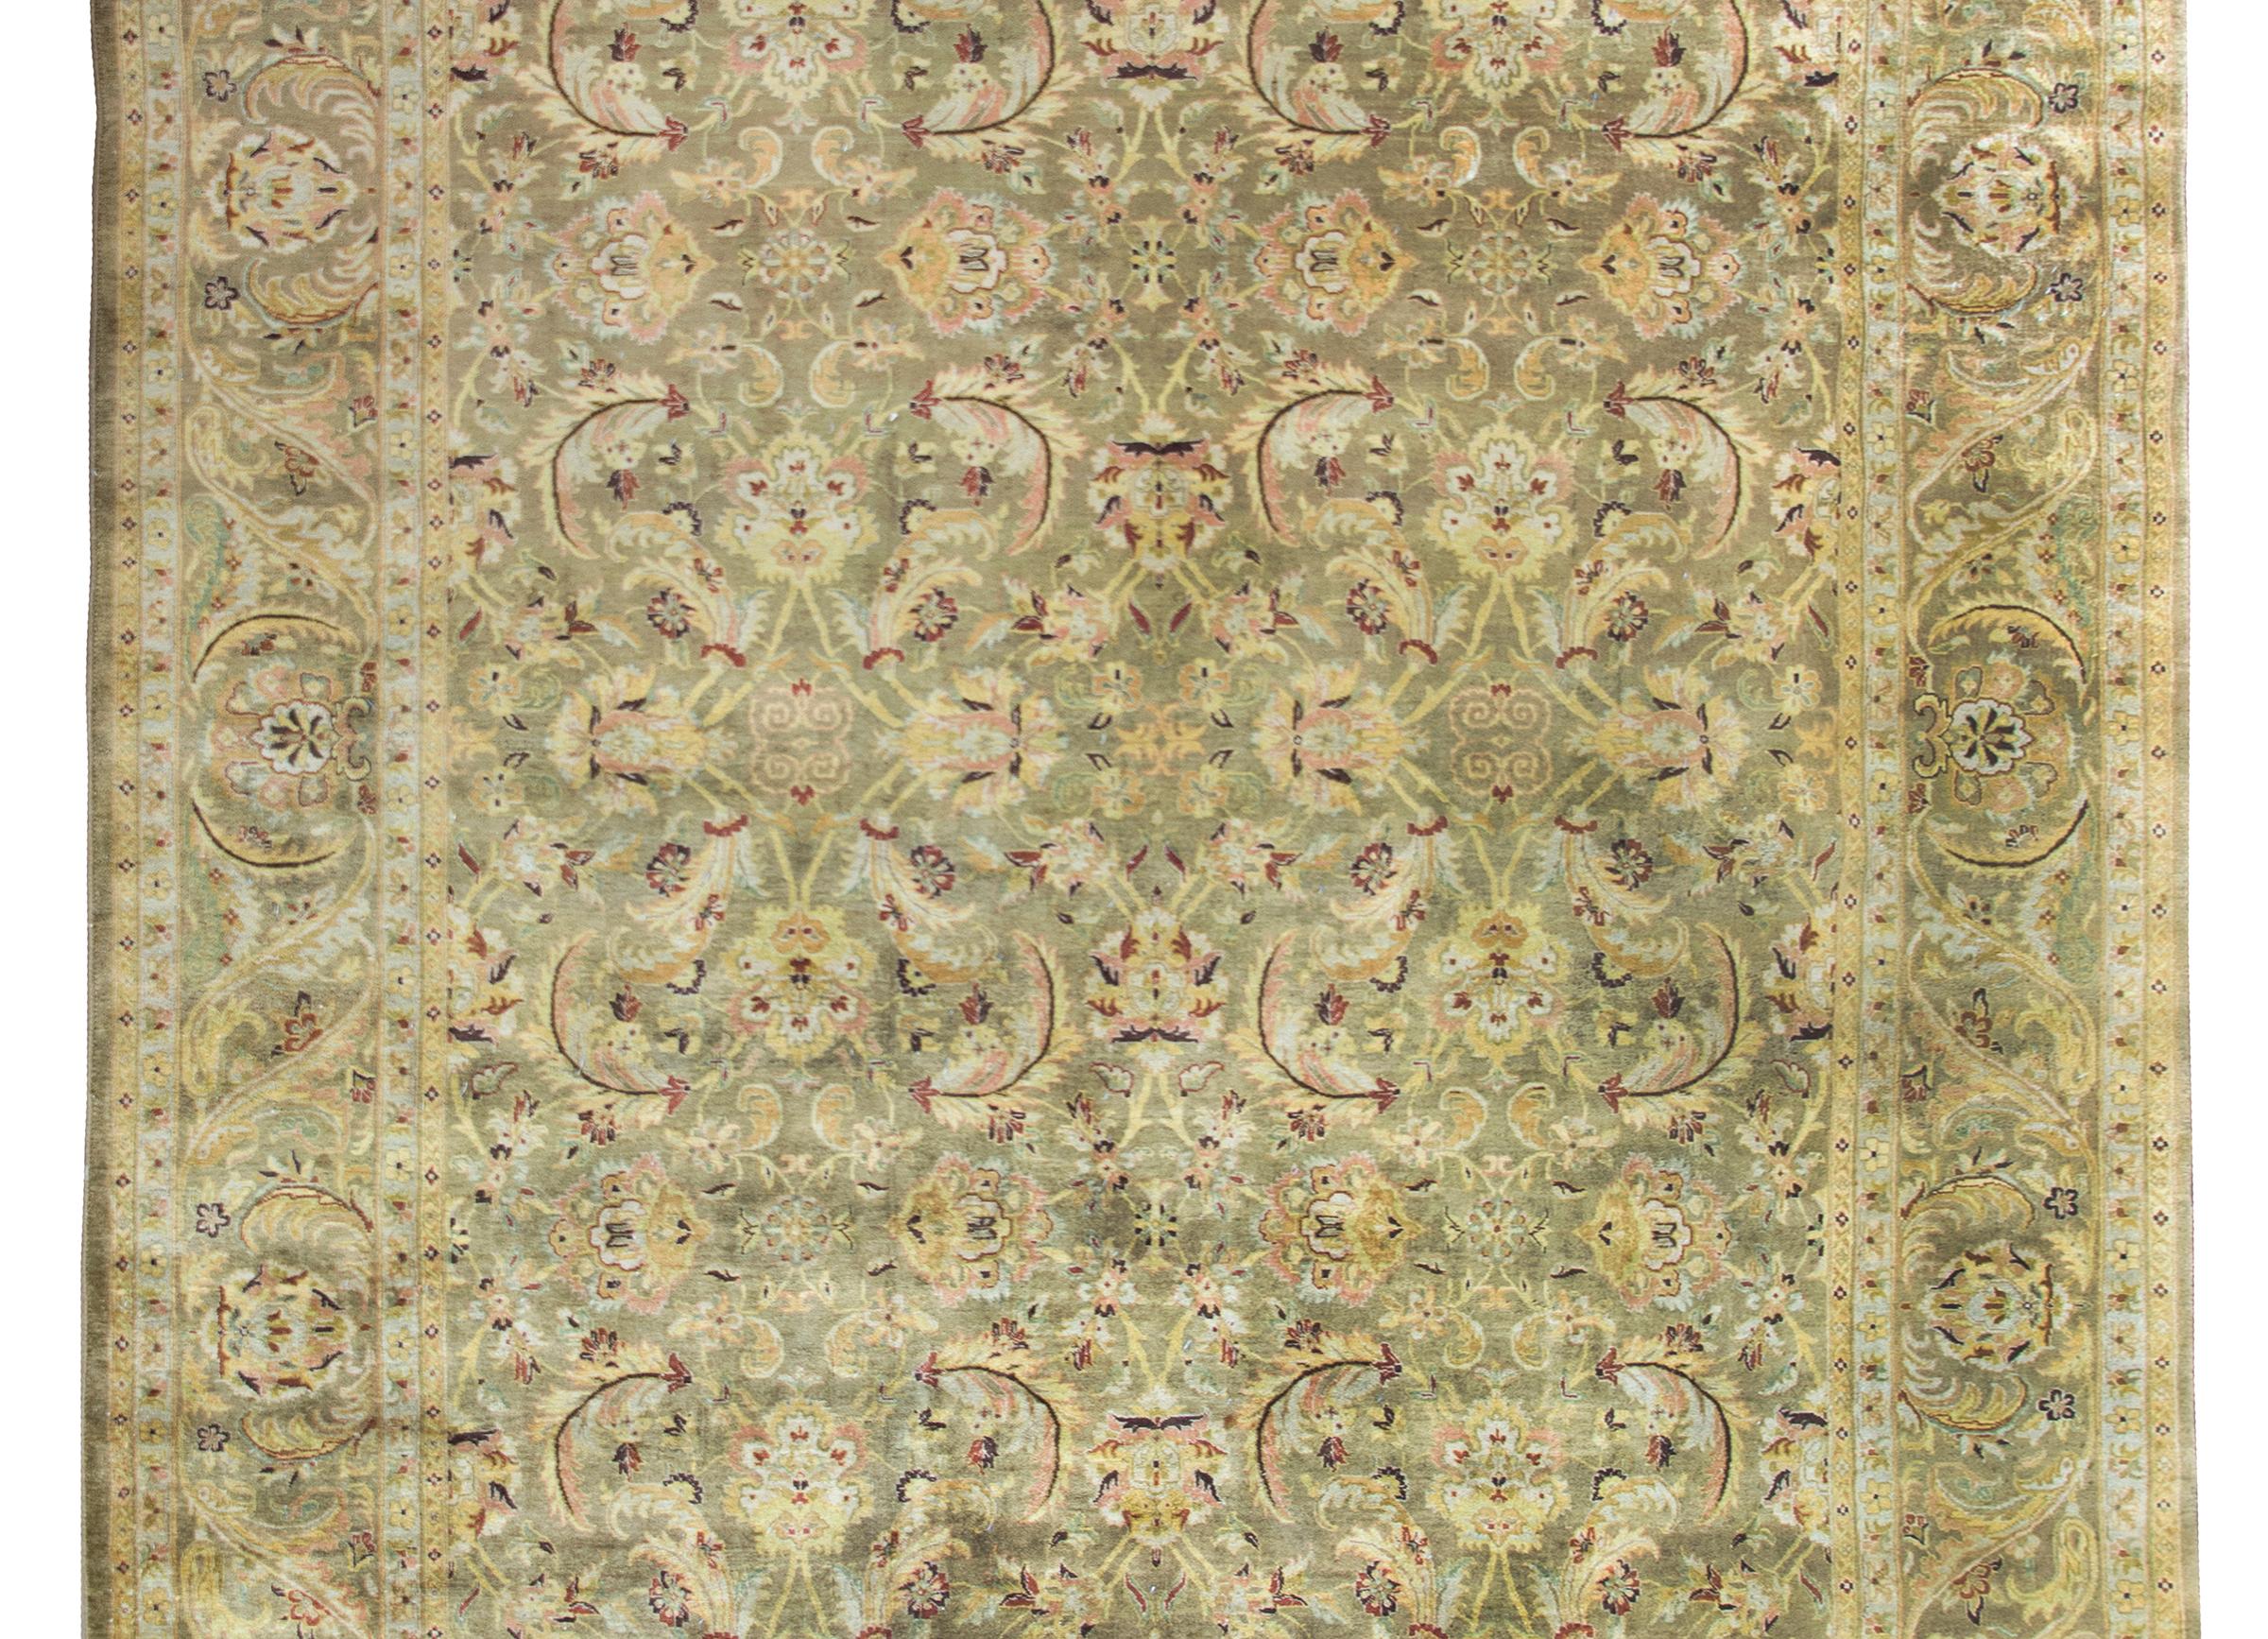 A wonderful late 20th century Indian Oushak rug with an all-over mirrored large-scale floral, leaf, and vine pattern surrounded by a complementary border with more large-scale flowers and all woven in pale yellow, cranberry, pink, and orange, set